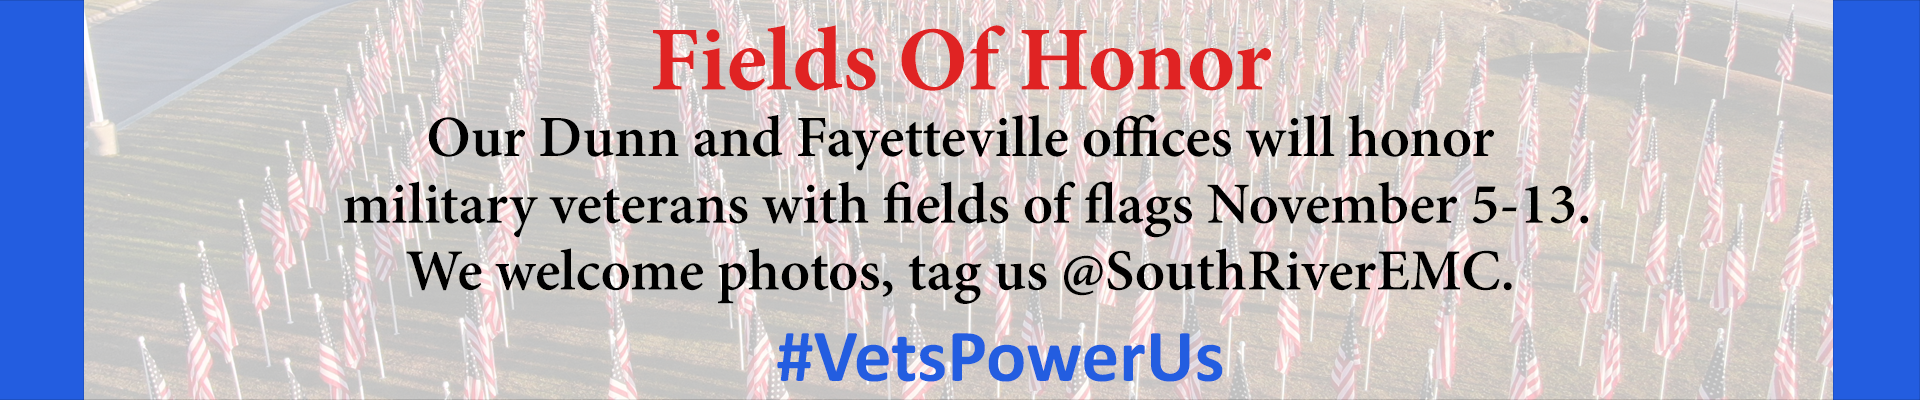 Visit Fields Of Honor